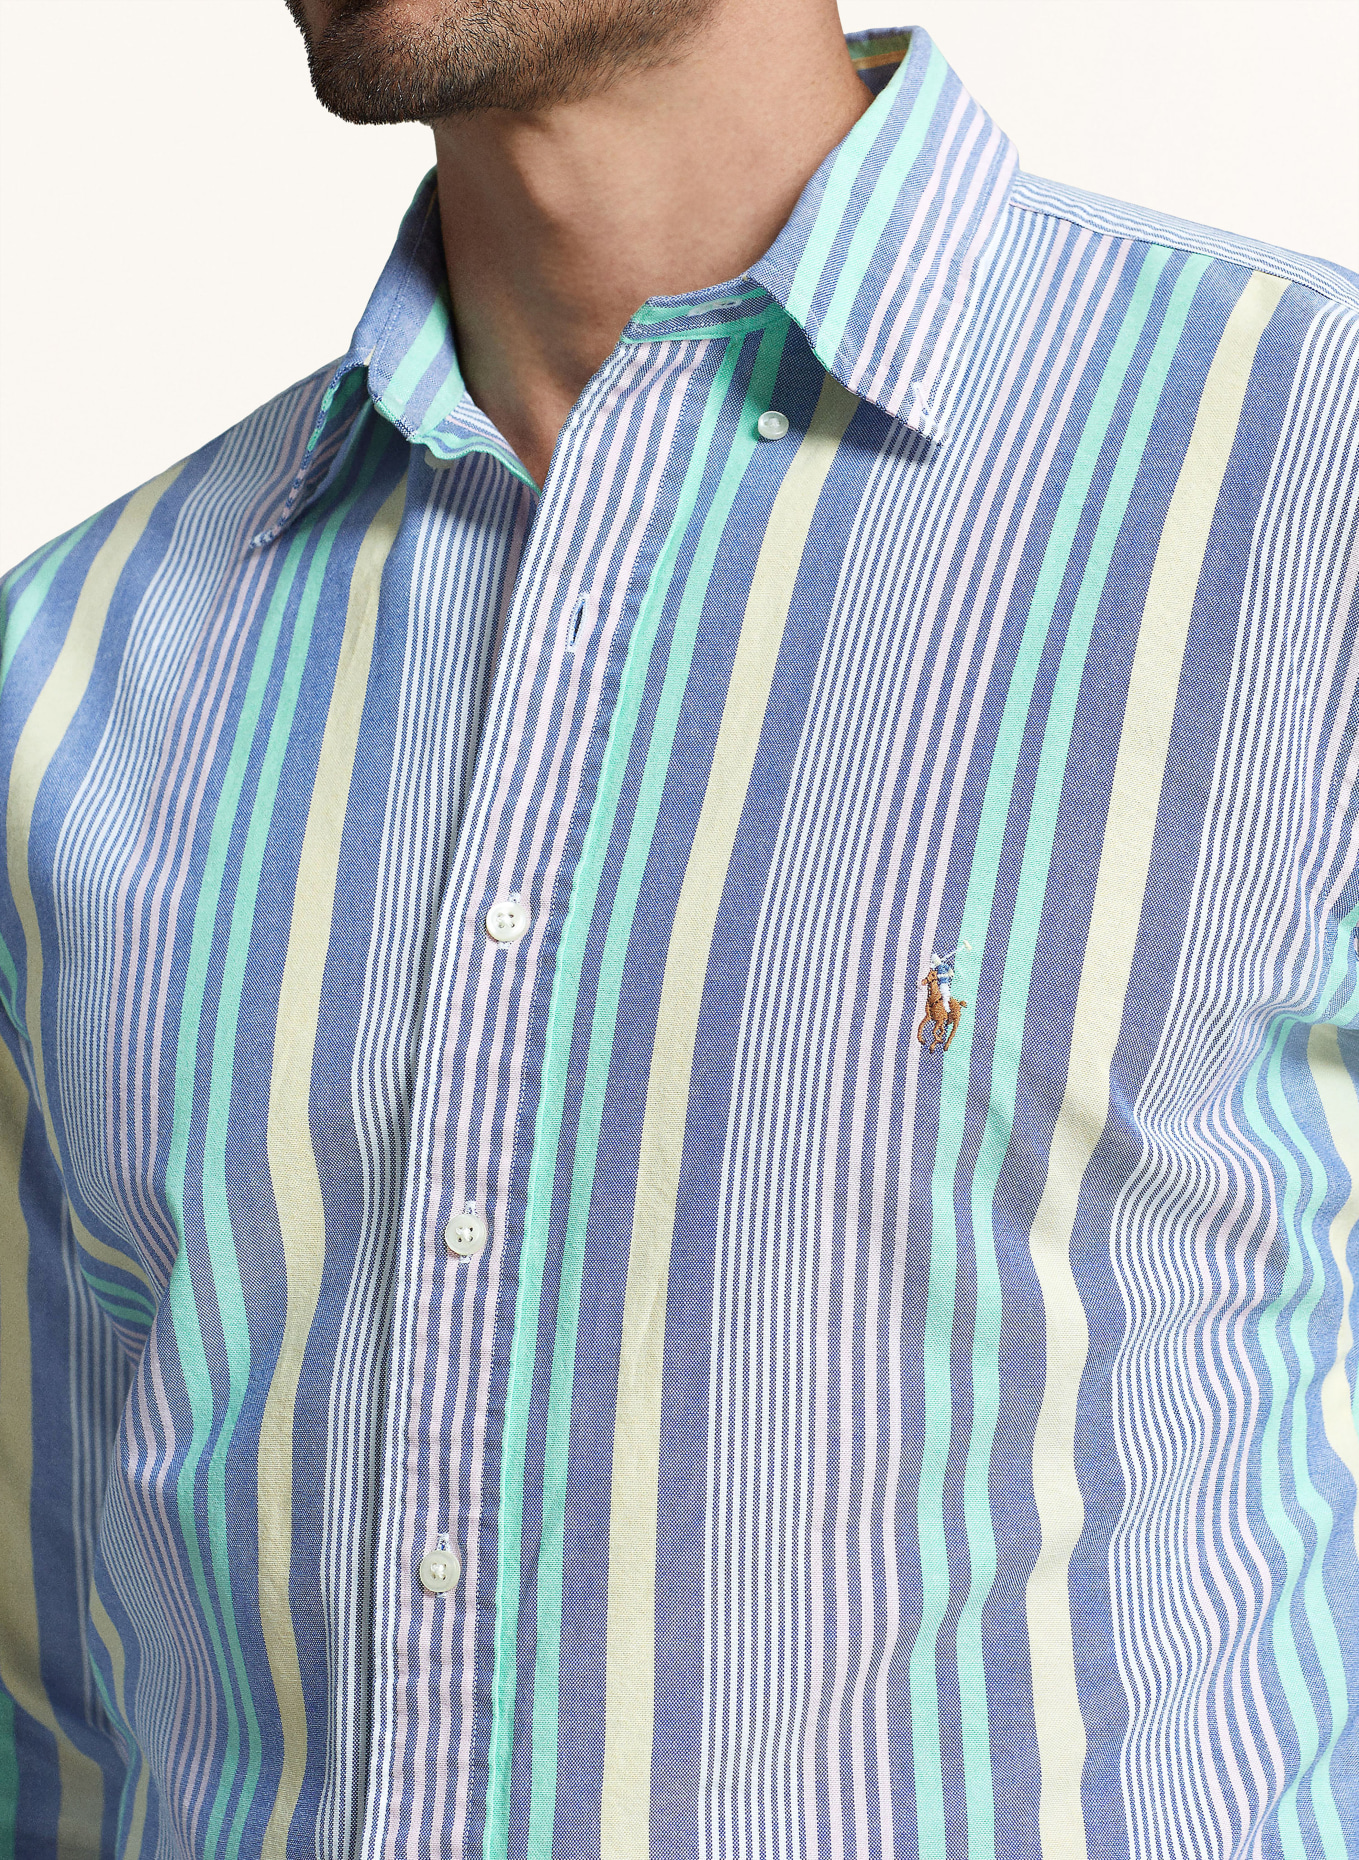 POLO RALPH LAUREN Big & Tall Shirt regular fit, Color: BLUE/ WHITE/ TURQUOISE (Image 4)